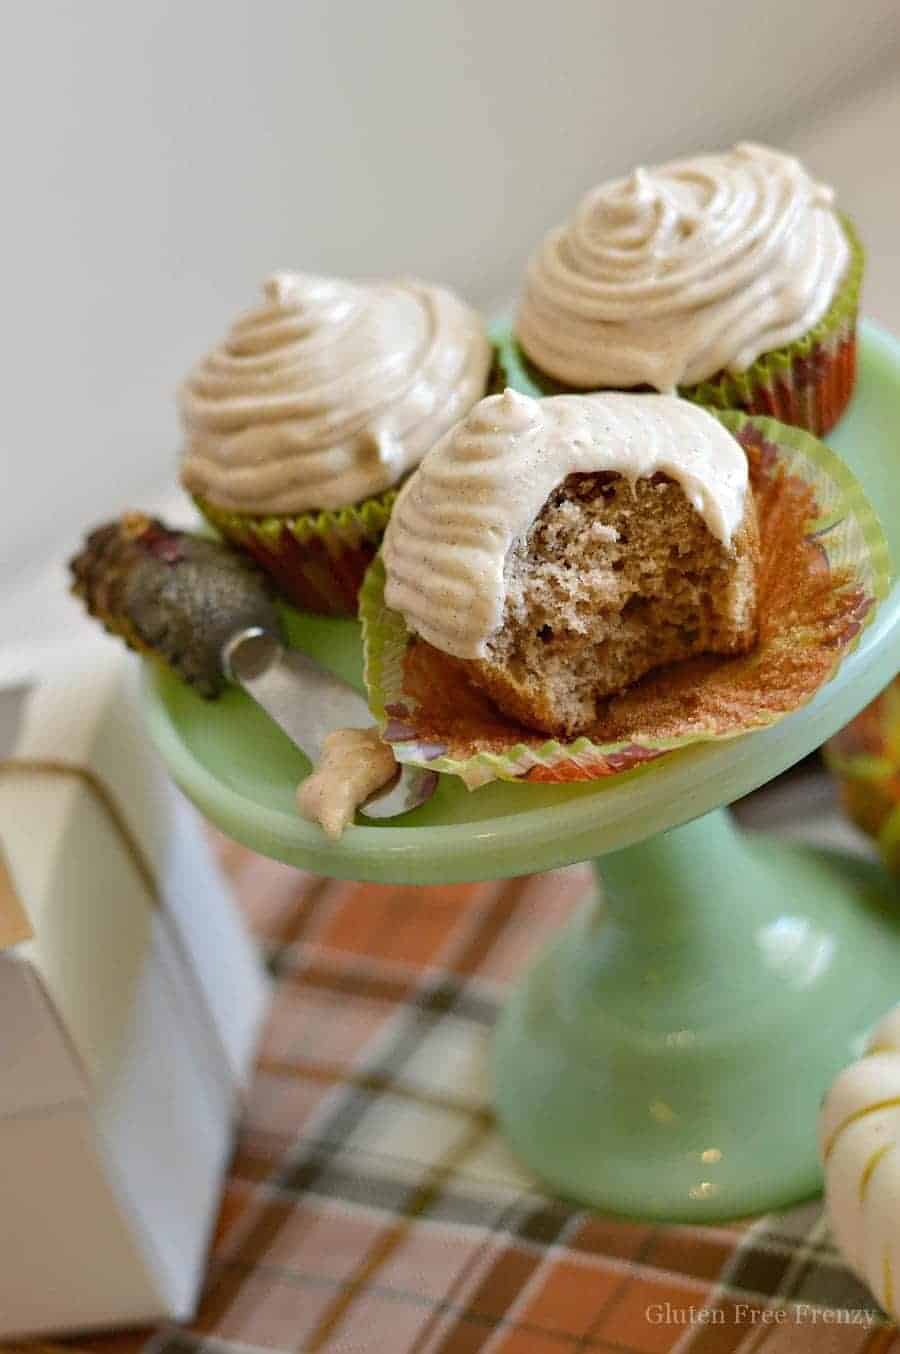 Three frosted apple cider cupcakes on a green cake stand. One cupcake is bitten into so you can see the fluffy texture of the cupcake.